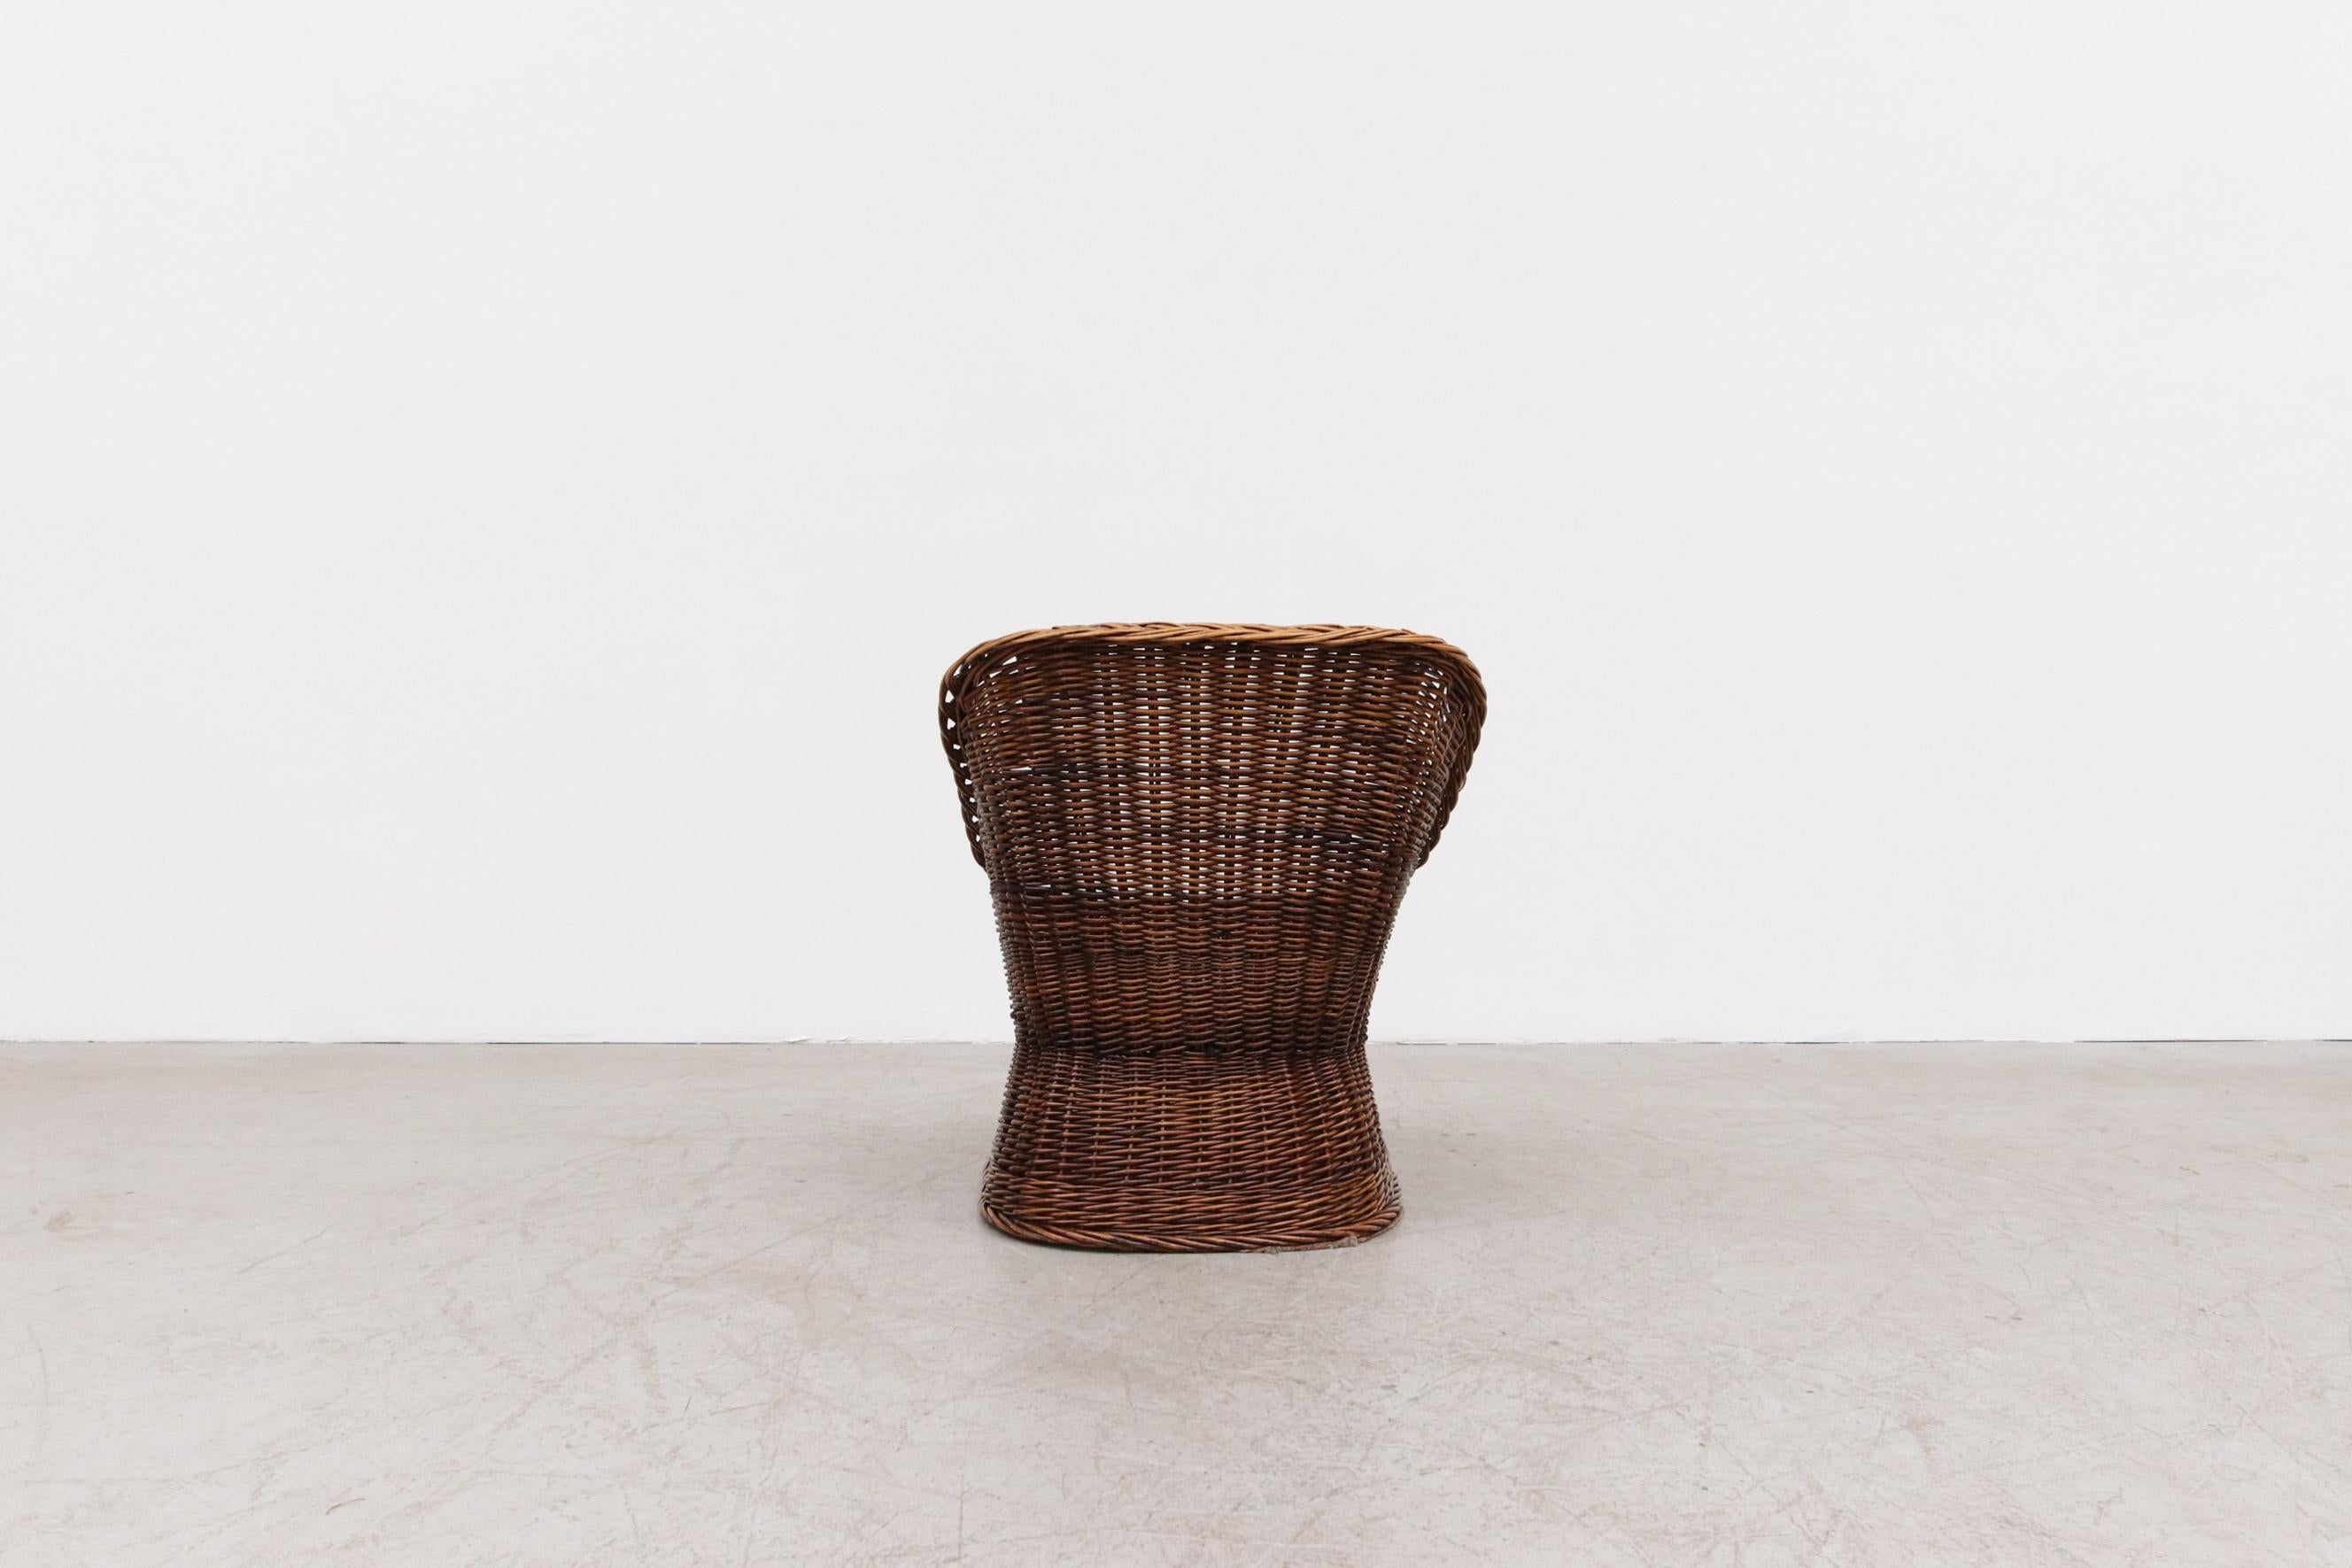 Late 20th Century 1970s Rattan Bucket Chair w/ Canvas Cushion, Square Shaped Body & Pedestal Base  For Sale